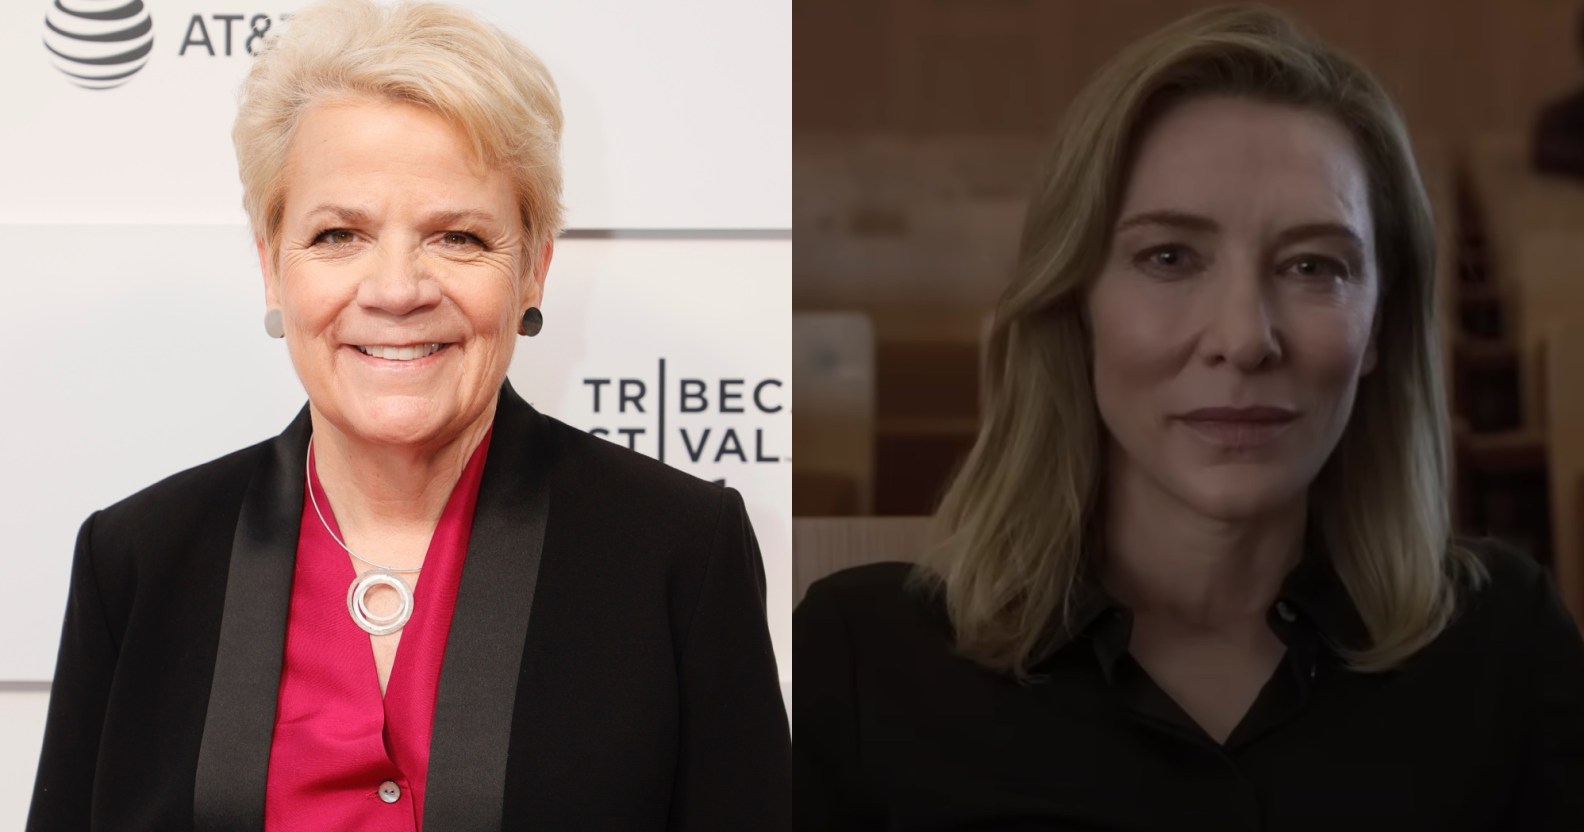 Two split images show on the left conductor Marin Alsop wearing a red shirt and black jacket smiling as she poses at a red carpet event and on the right-hand side is a still from the film Tár showing actor Cate Blanchett as Lydia Tár wearing a black top